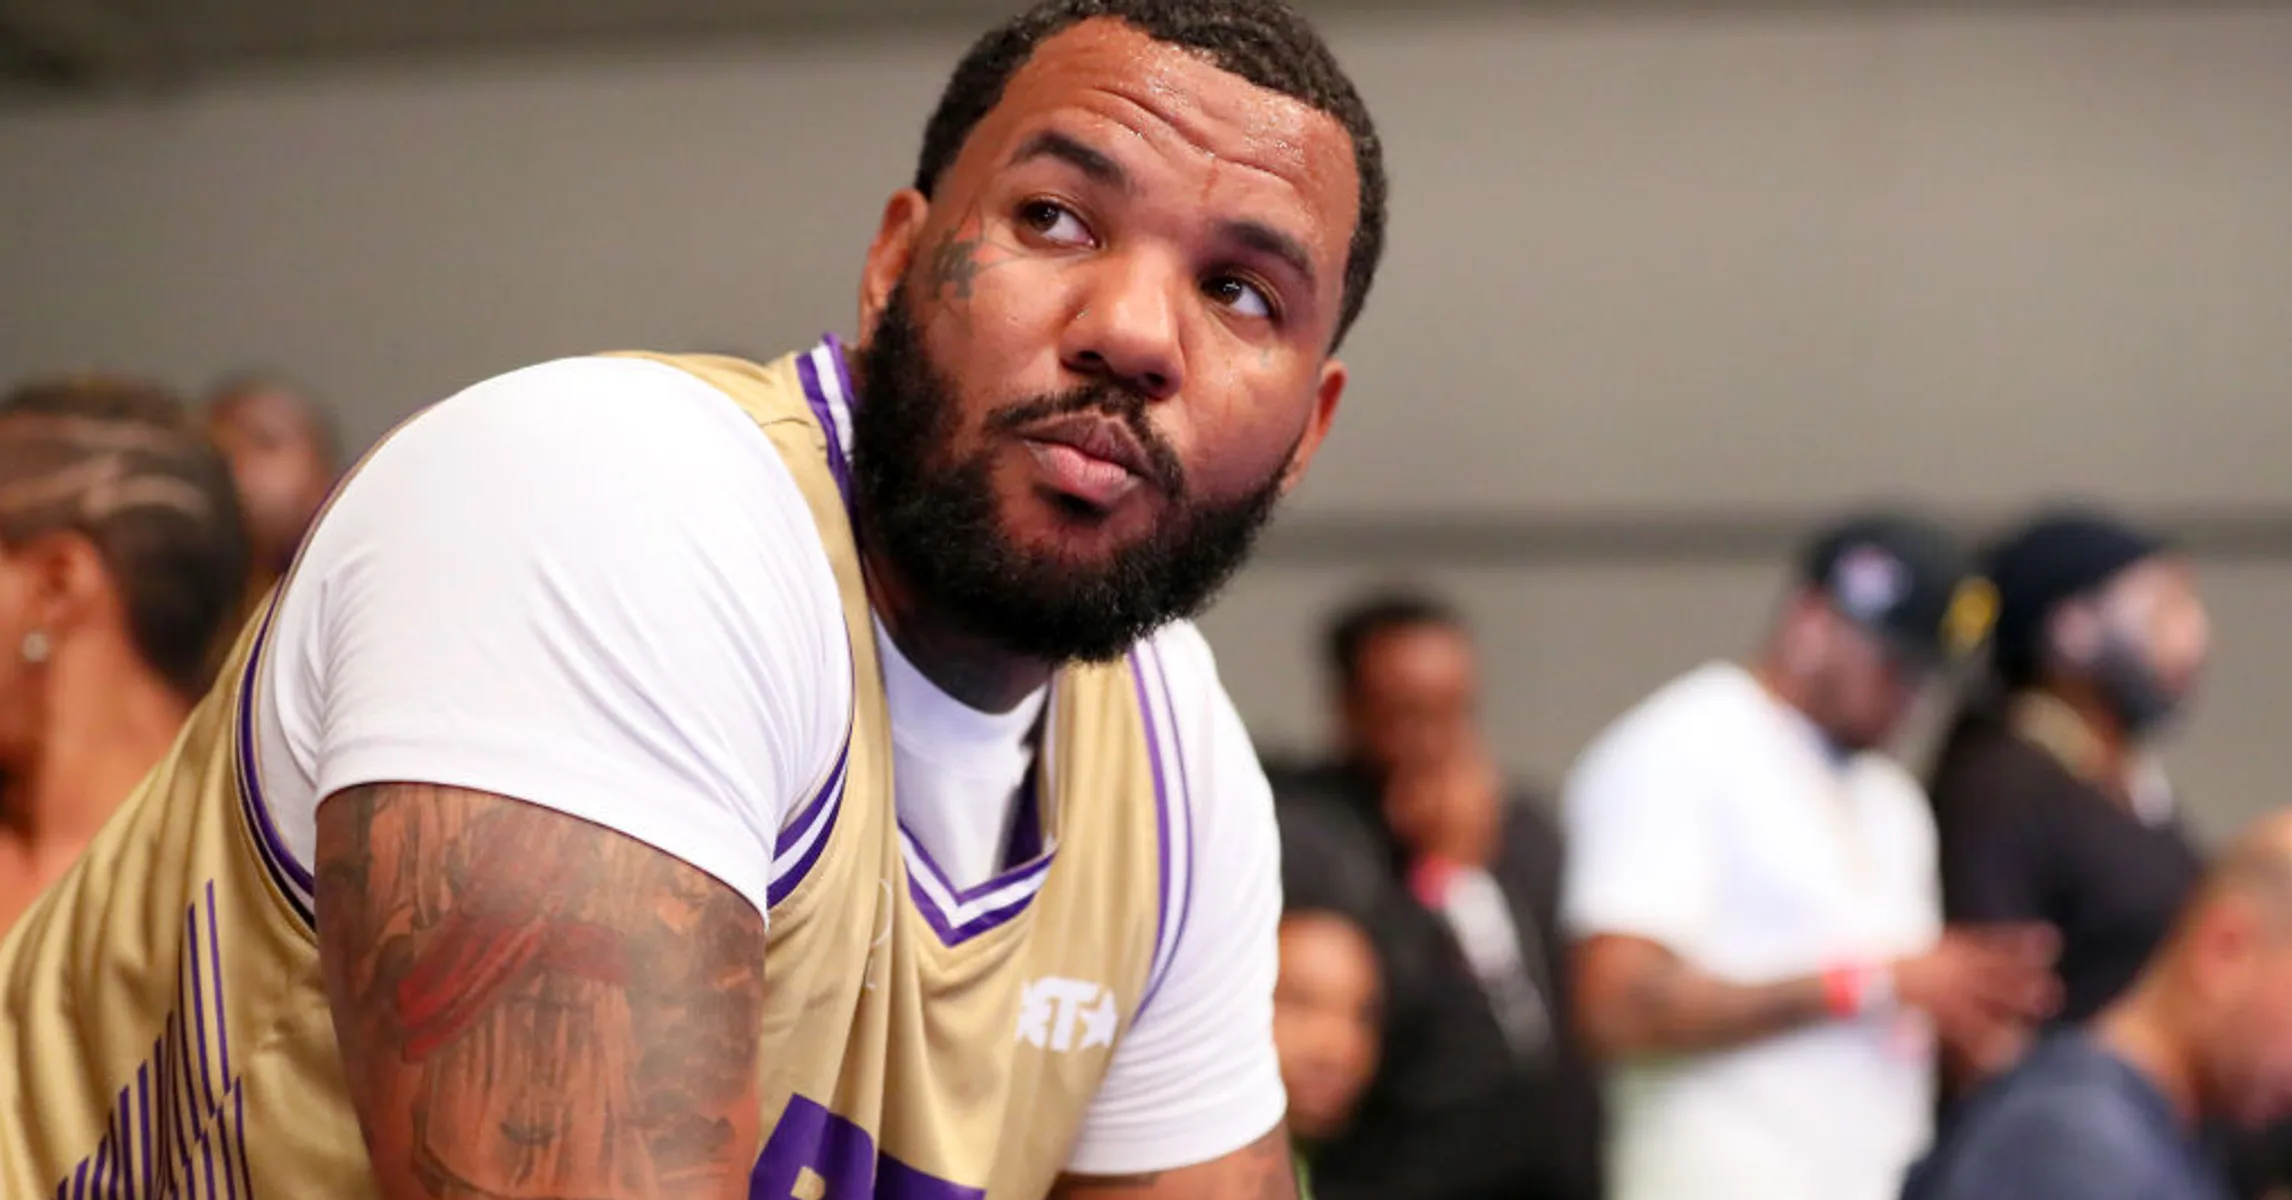 The Game Criticizes J Cole For “Watering Down” Rap Battles